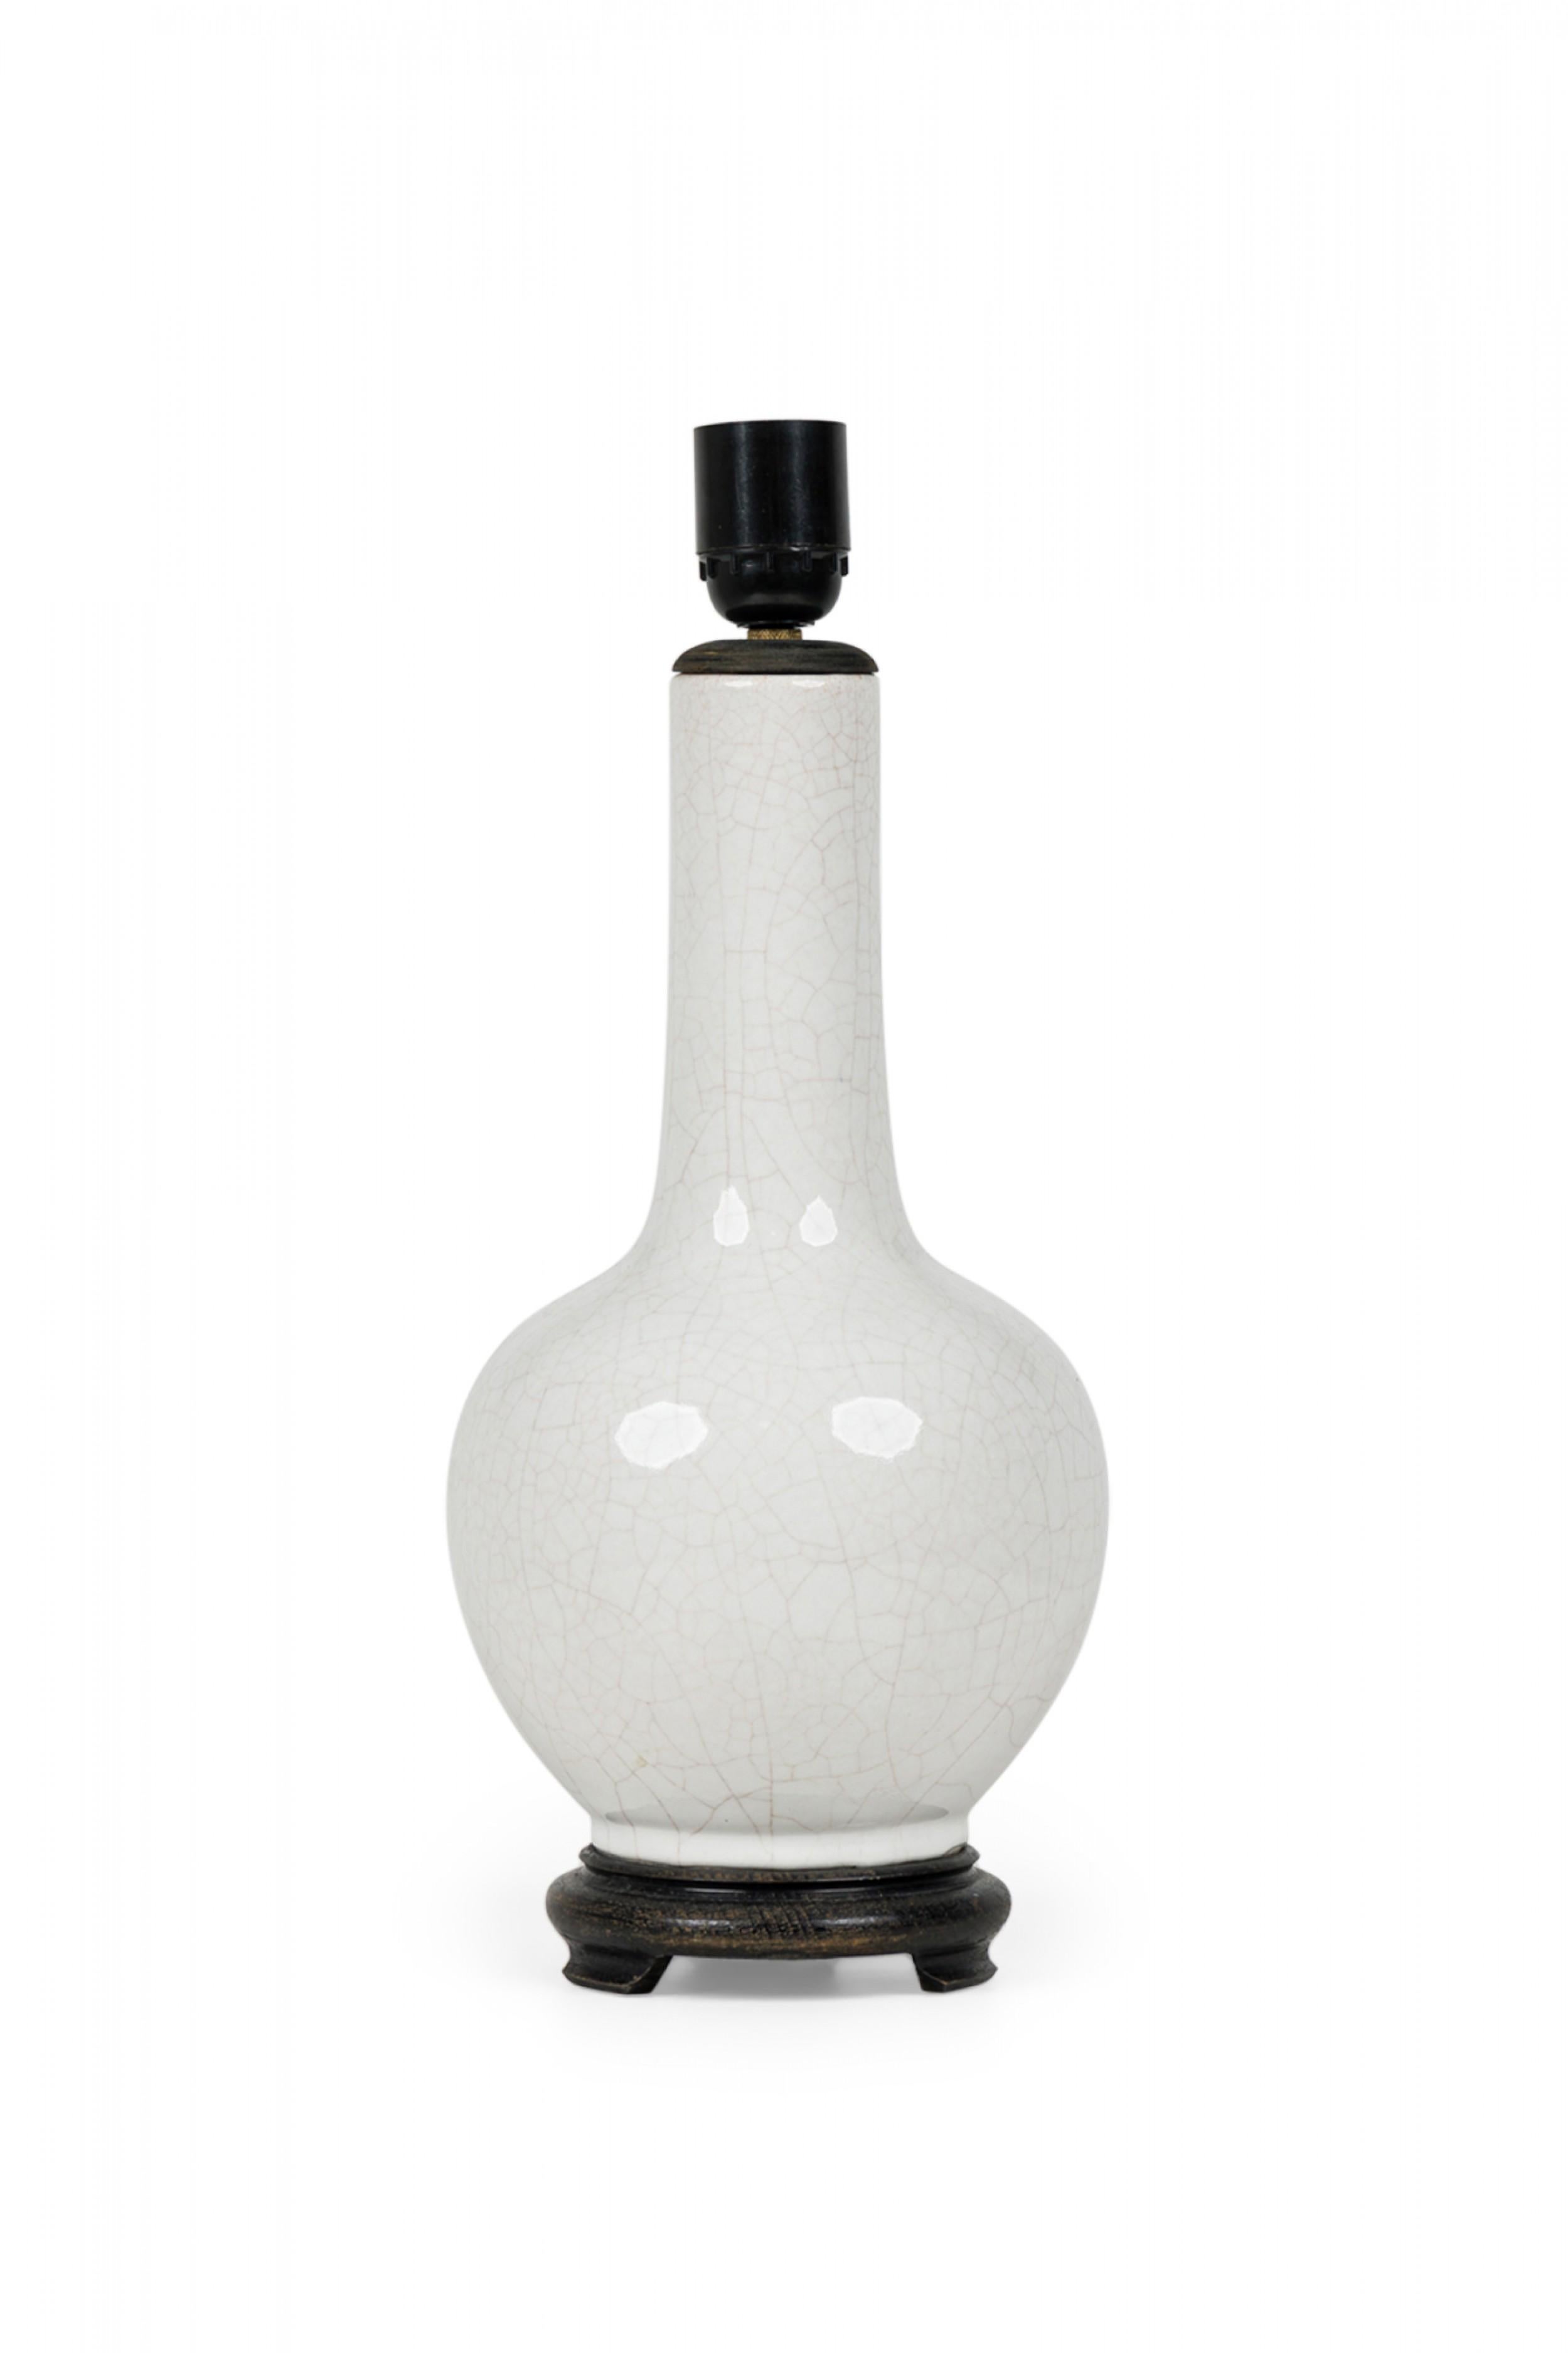 Metal Chinese Porcelain White Crackle Glazed Table Lamp on Carved Wood Base